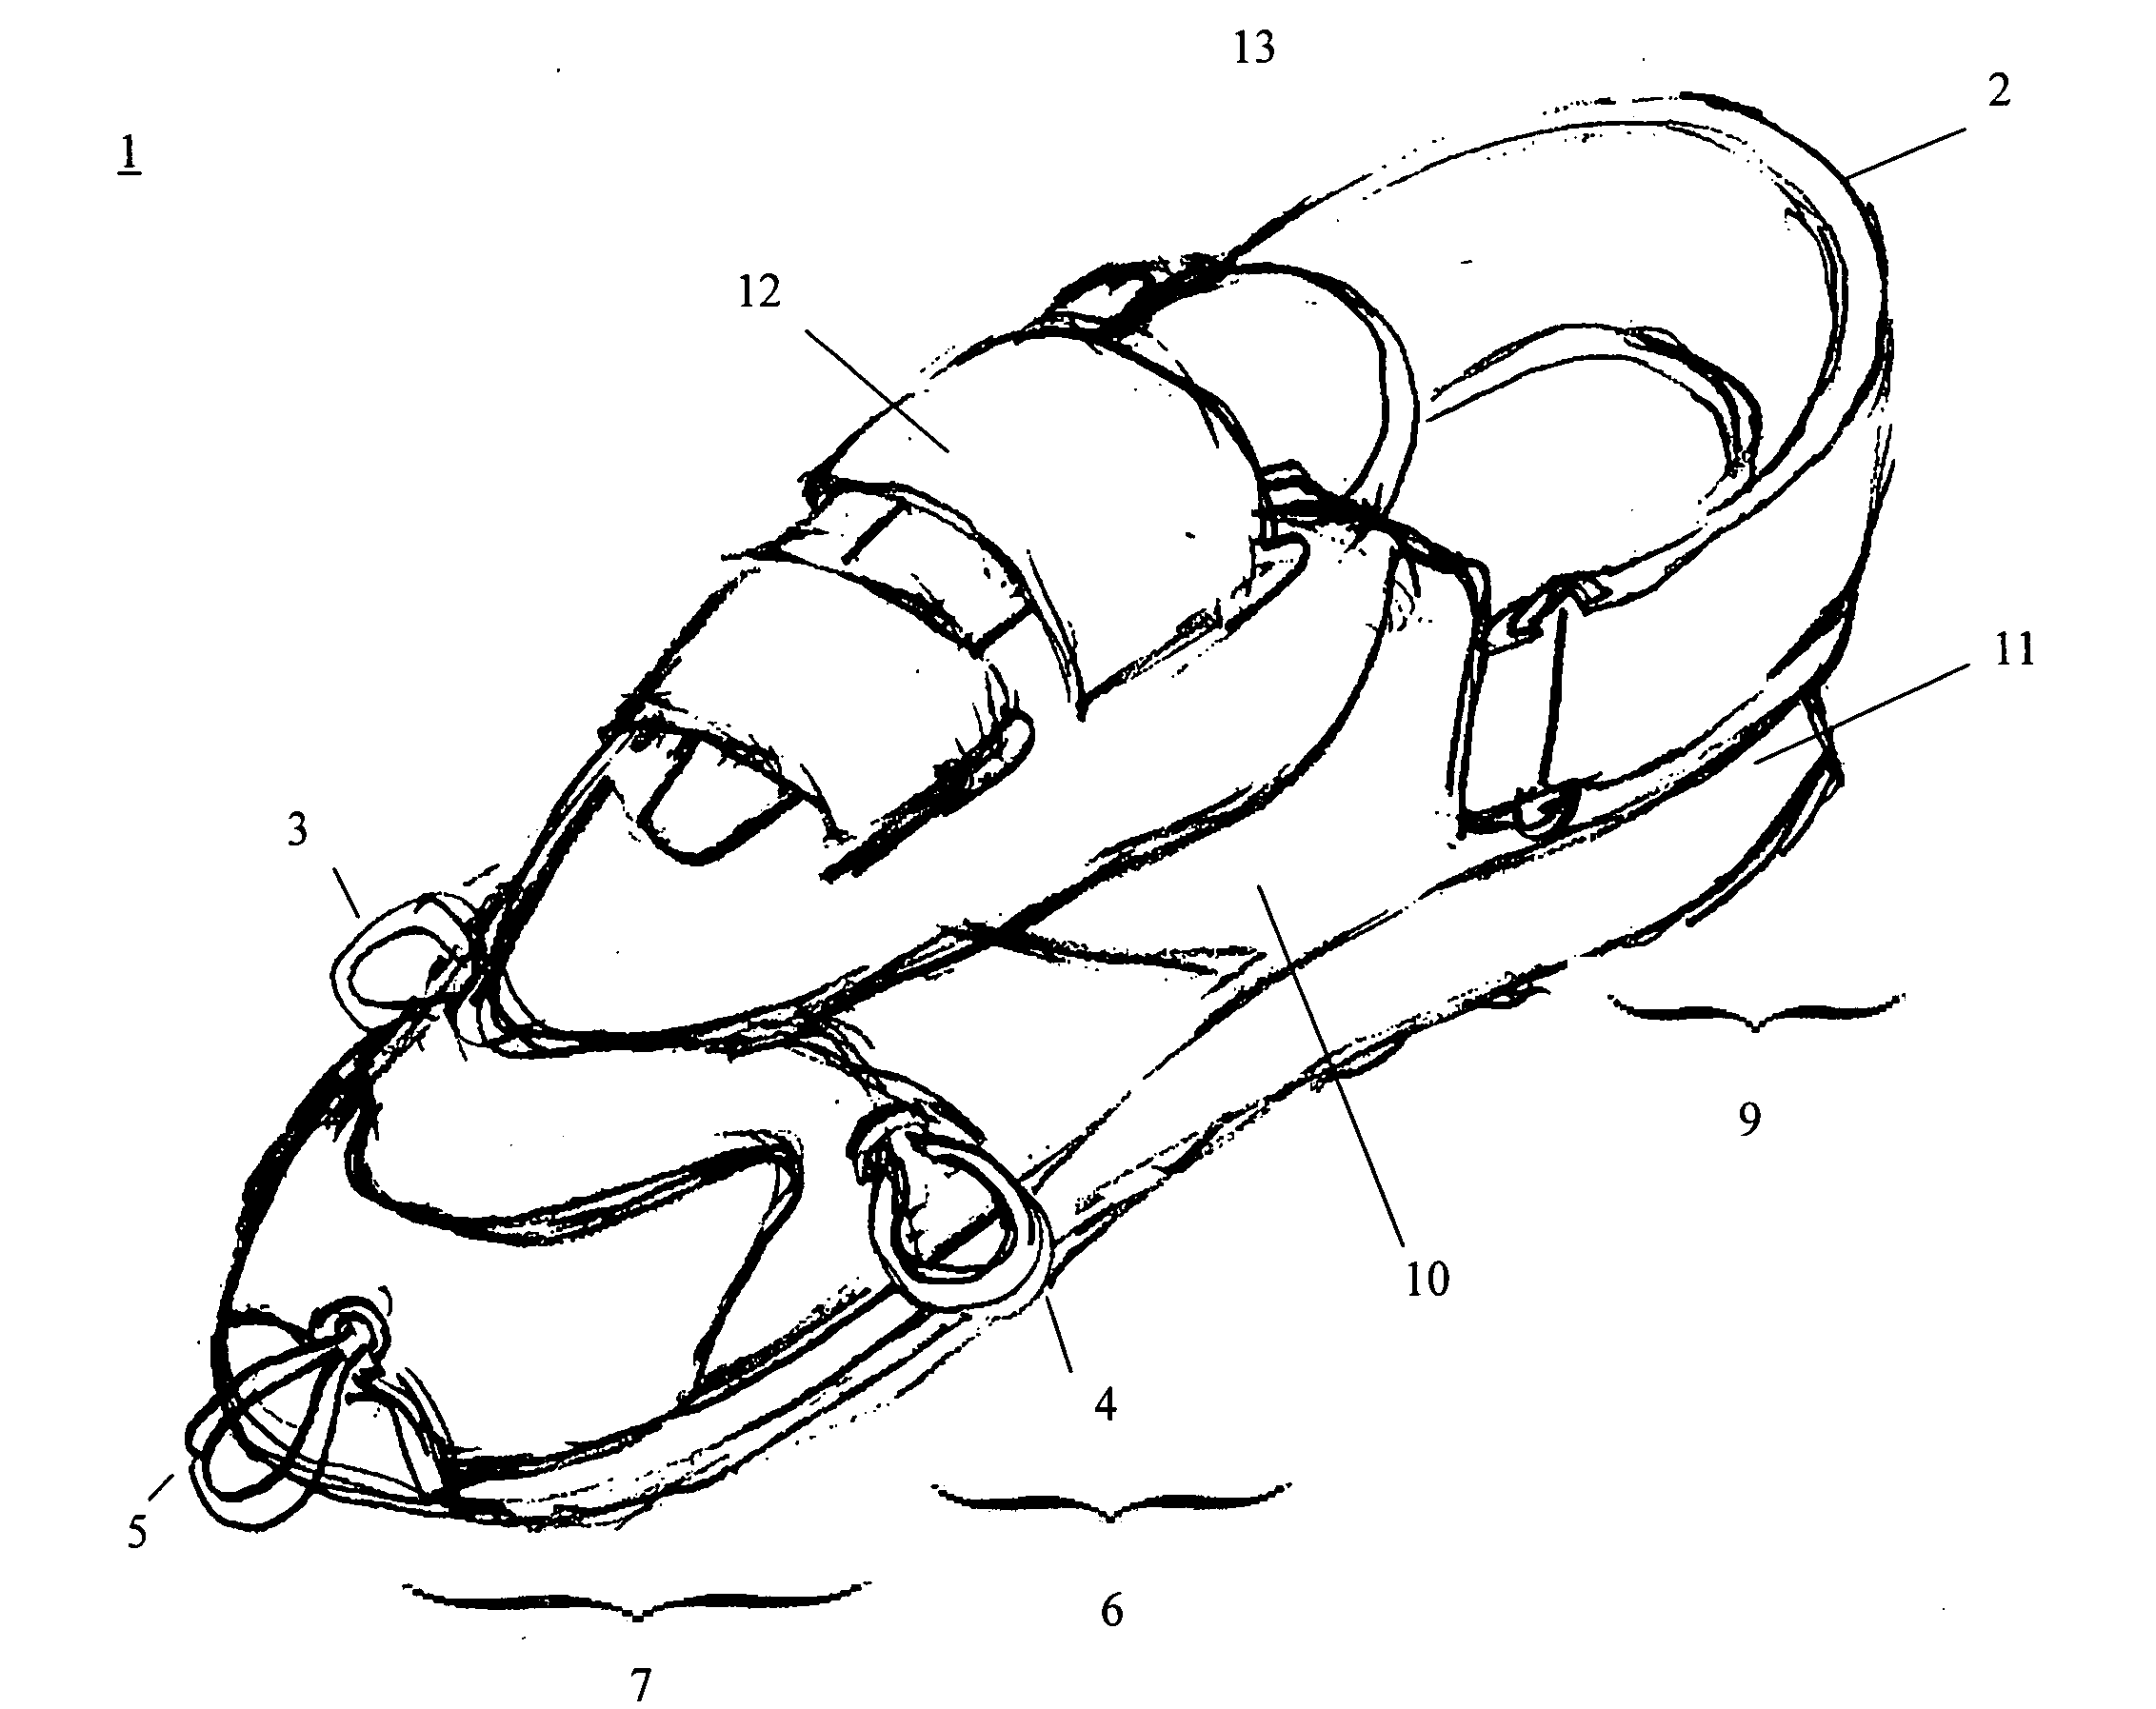 Exercise sneaker having a plurality of attachment points along an outer peripheral thereof for attaching an elastic band to perform exercise movements